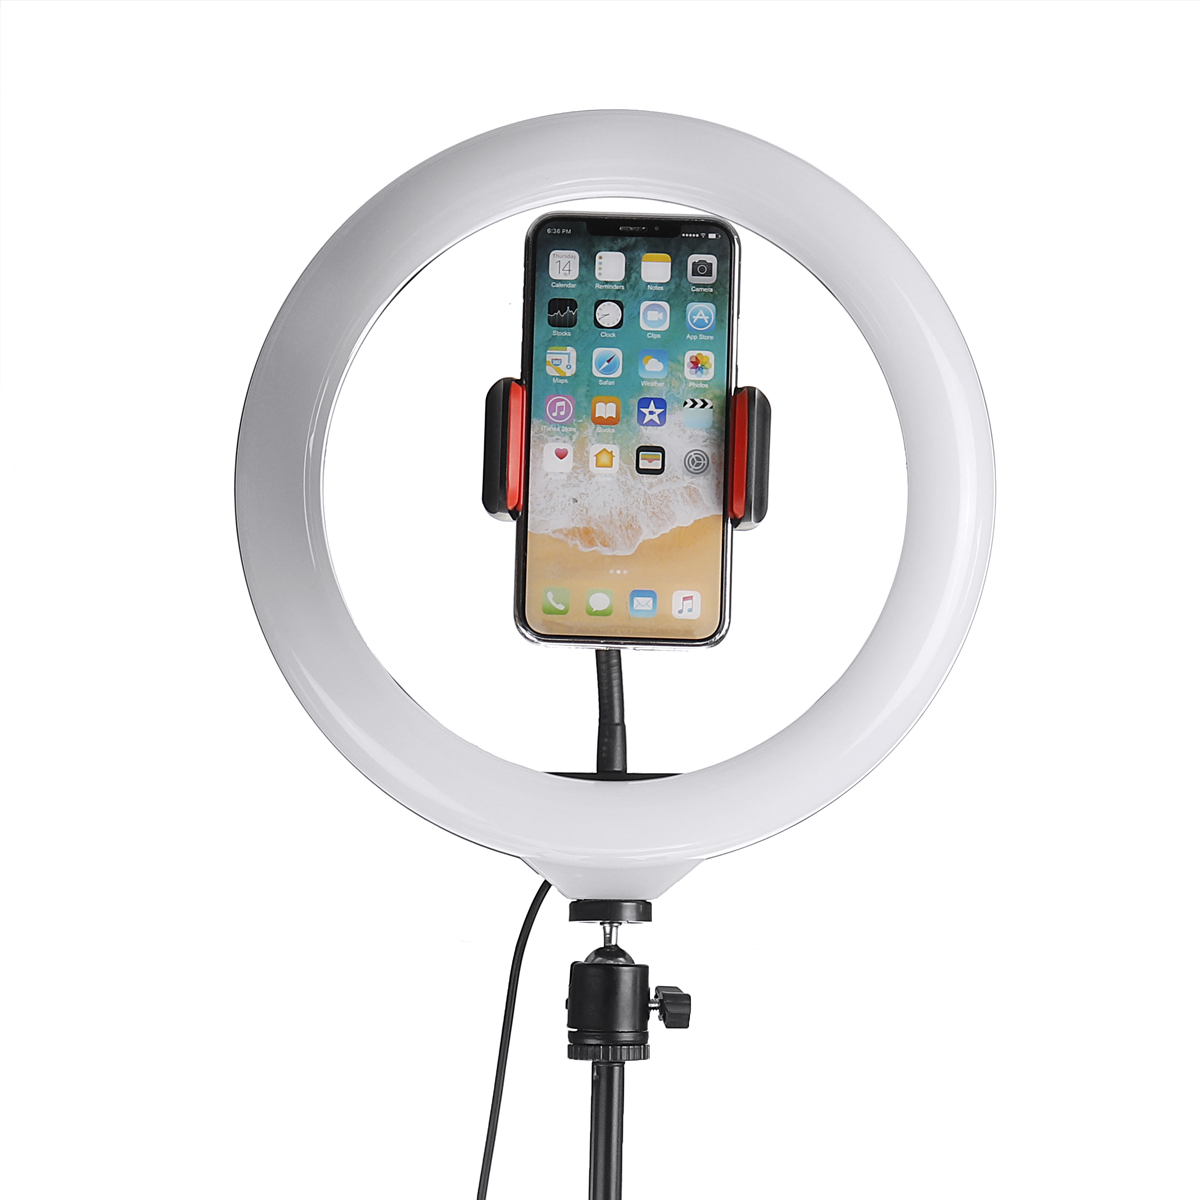 Bakeey-10inch-LED-Ring-Light-Portable-Telescopic-Tripod-Fill-Light-Dimmable-Flexible-Stand-Phone-Hol-1746941-5